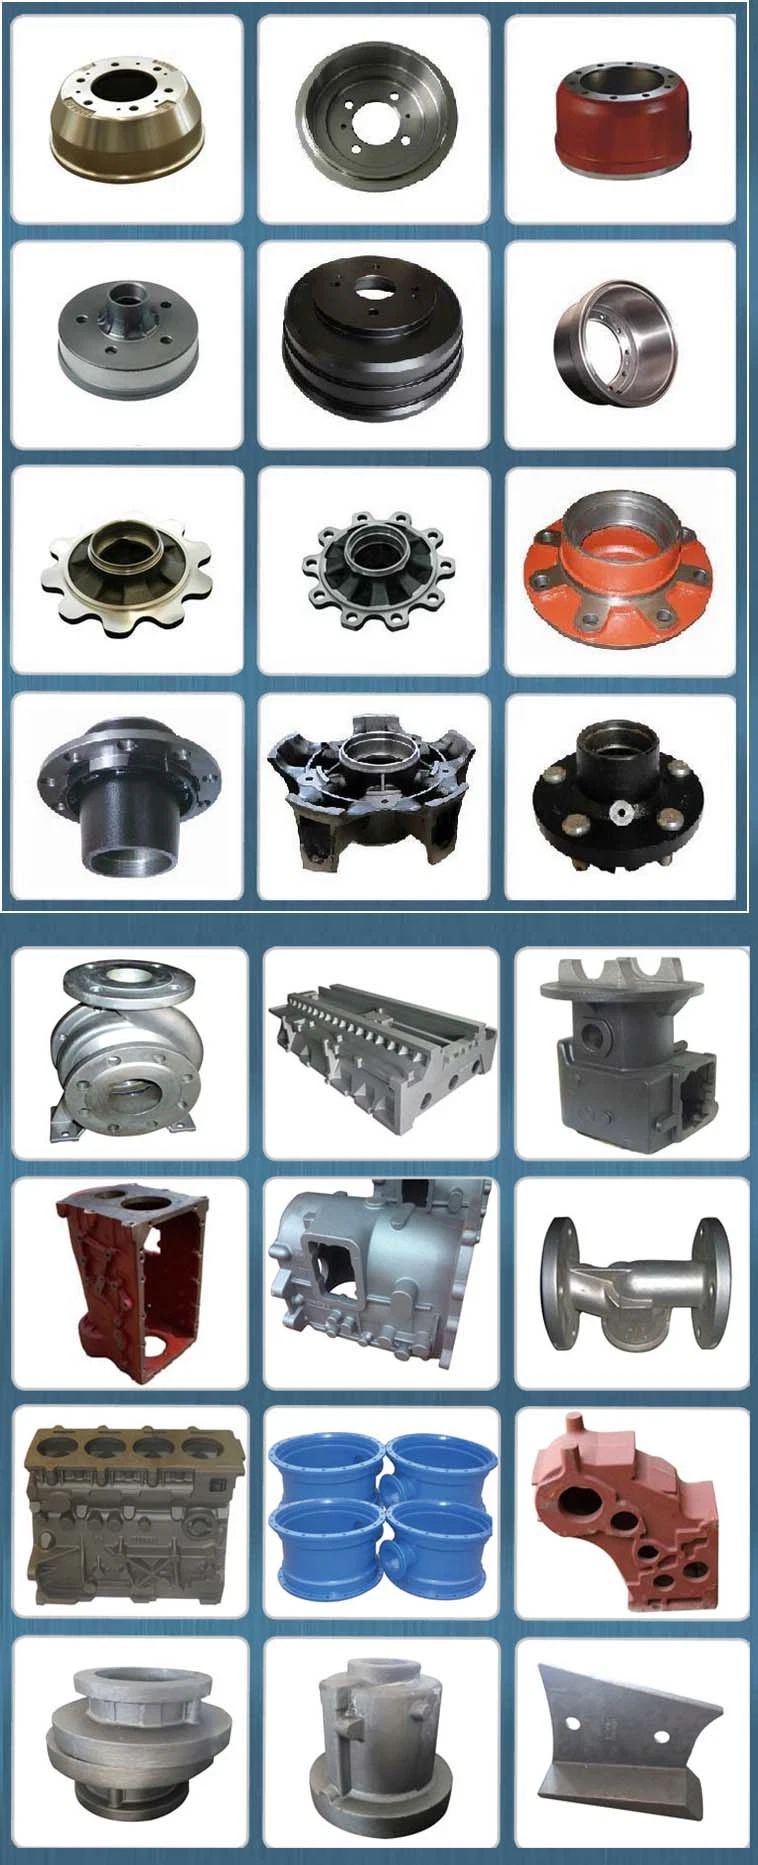 Iron Casting Fire Control Pipe Fittings, Comes in Resin and Green Sand Casting Iron Types Sand Casting